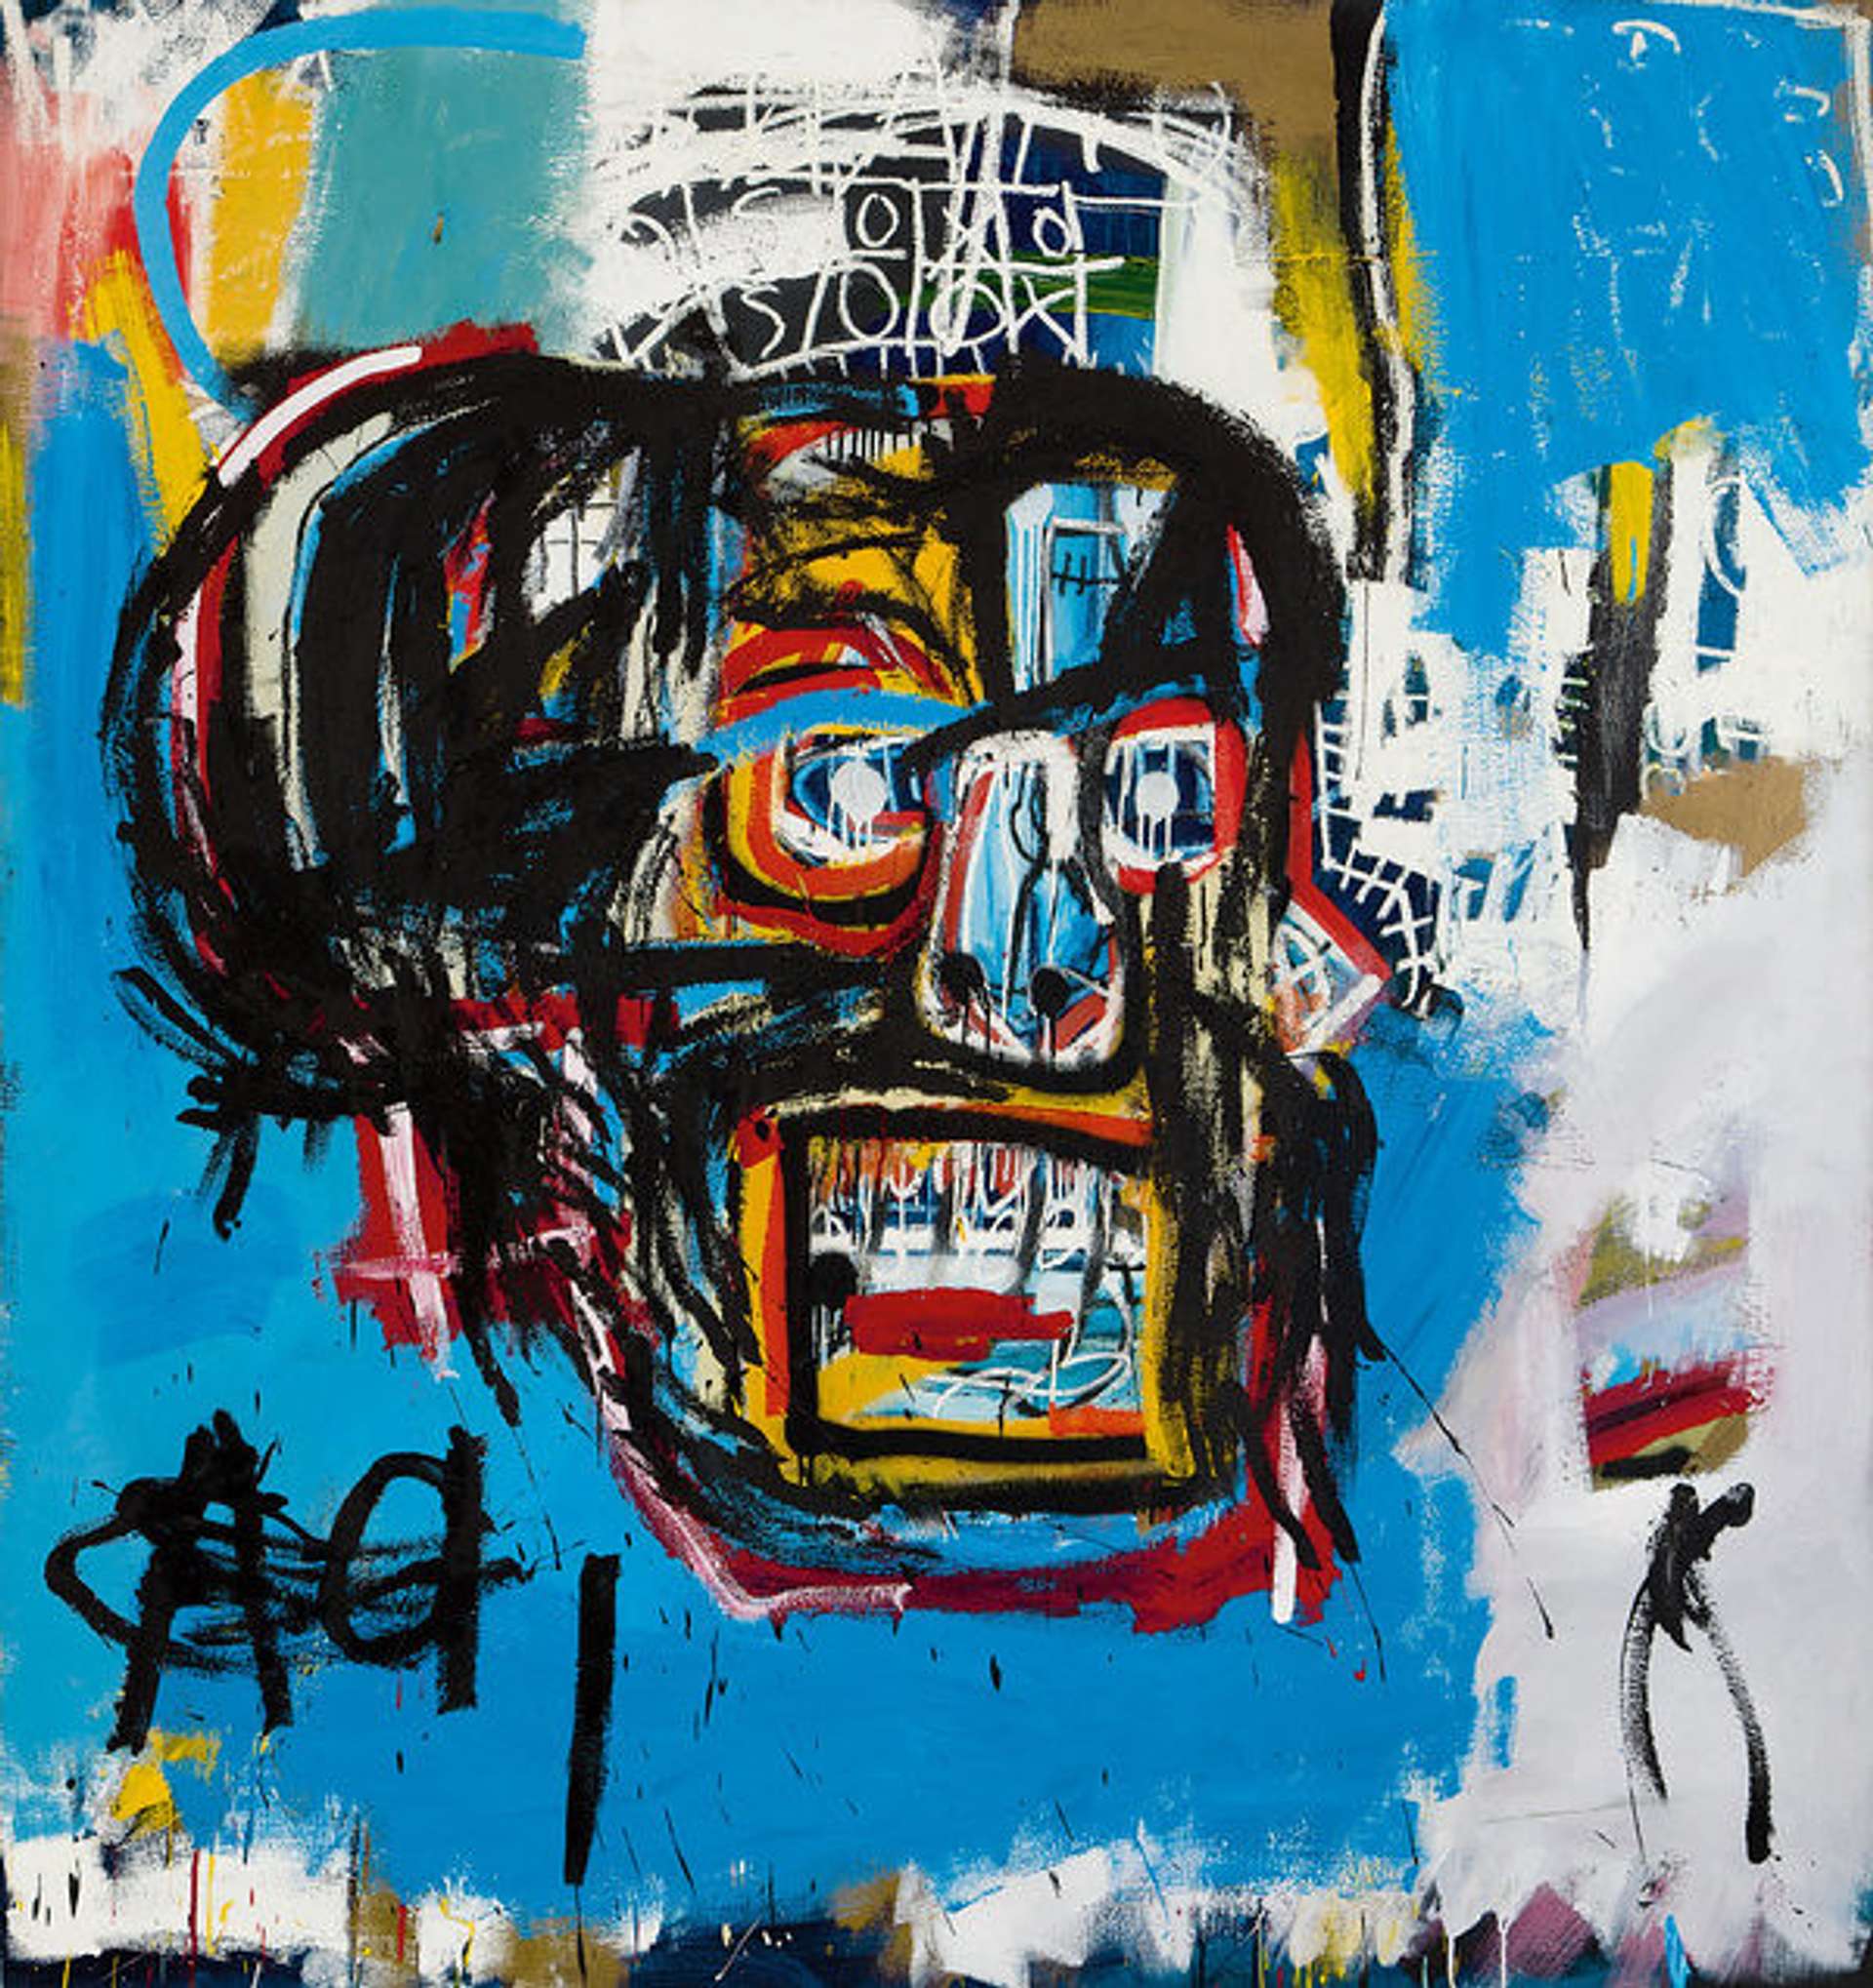 An expressive painting titled "Untitled (Skull)" by Jean-Michel Basquiat, depicting a skull rendered in black, grey, and white with vibrant hints of colour, surrounded by the artist's trademark symbols and text.